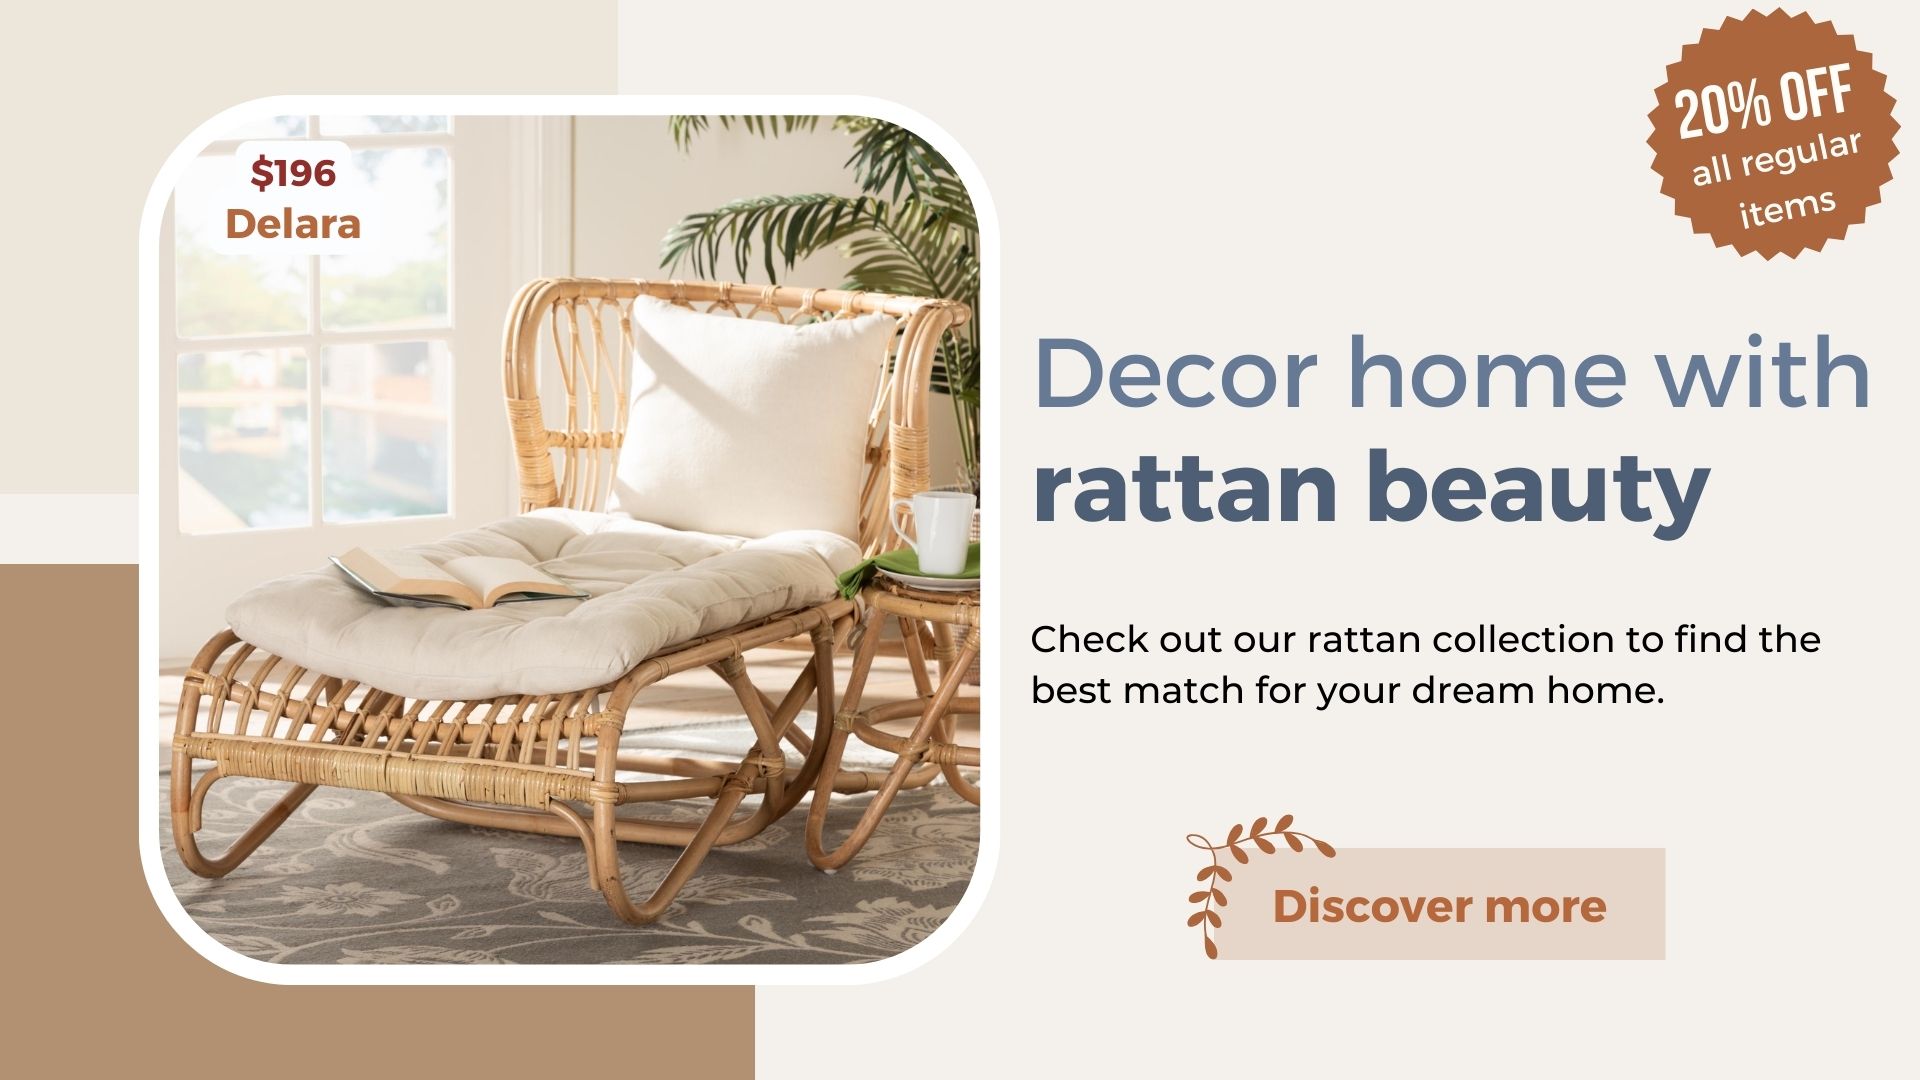 Decor home with rattan beauty Check out our rattan collection to find the best match for your dream home. Delara $196